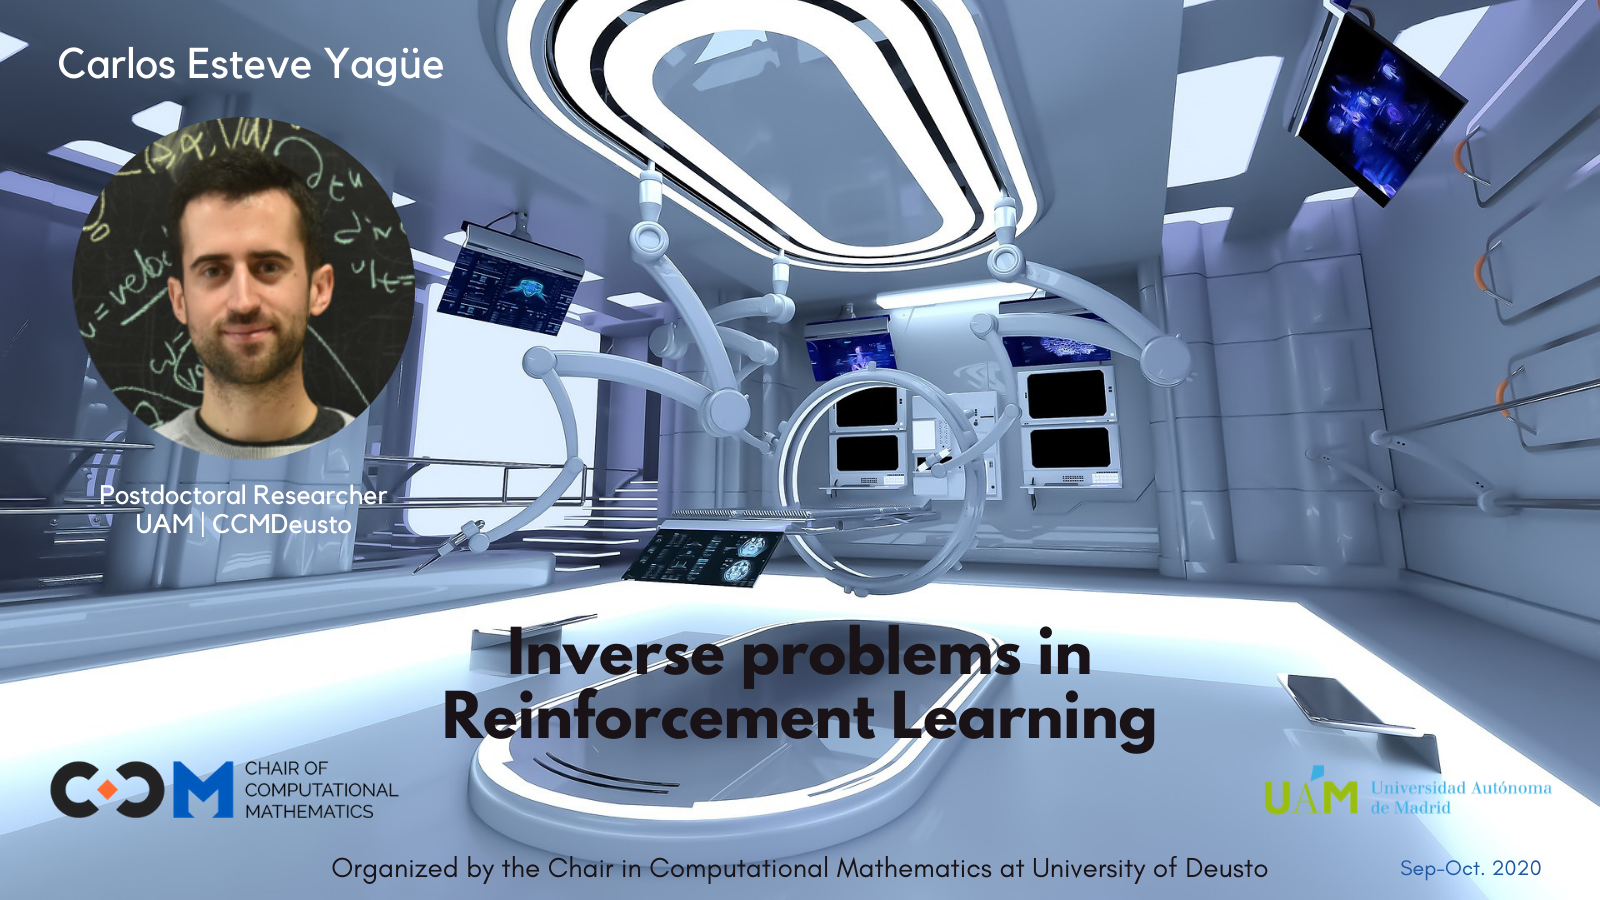 CCM Course: Inverse problems in Reinforcement Learning